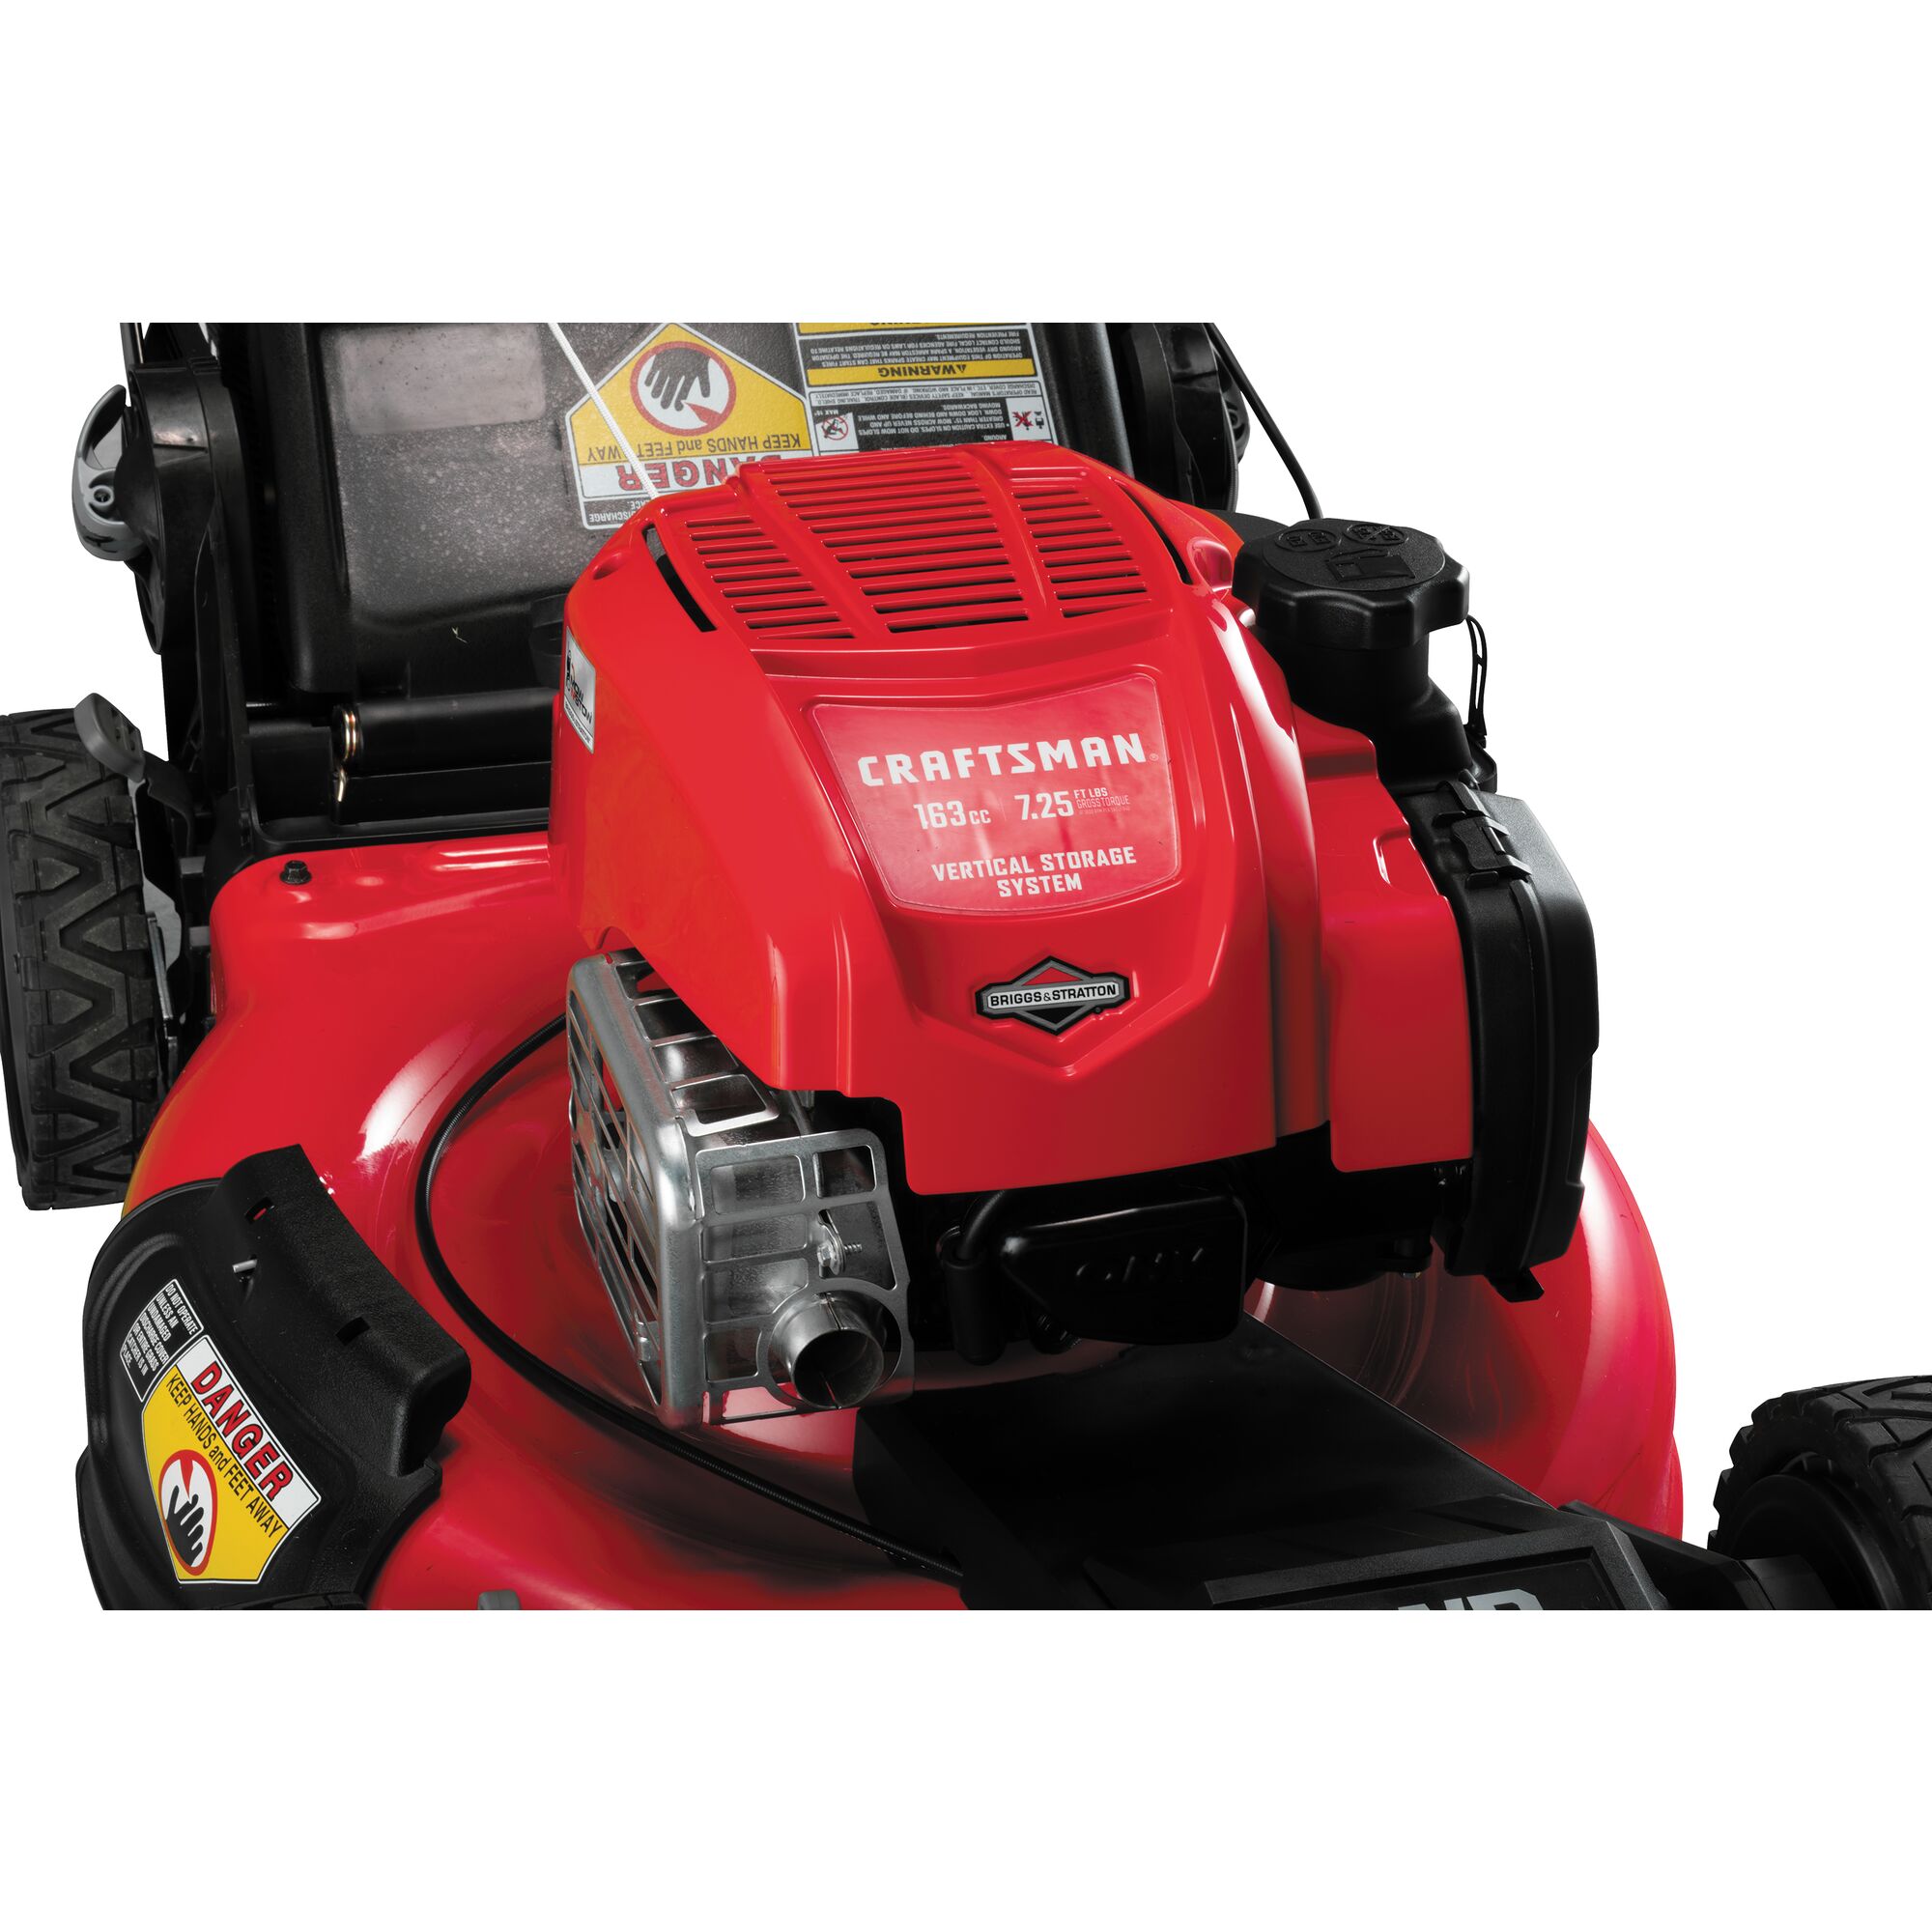 Powerful motor feature of 21 inch 163 c c f w d self propelled mower.